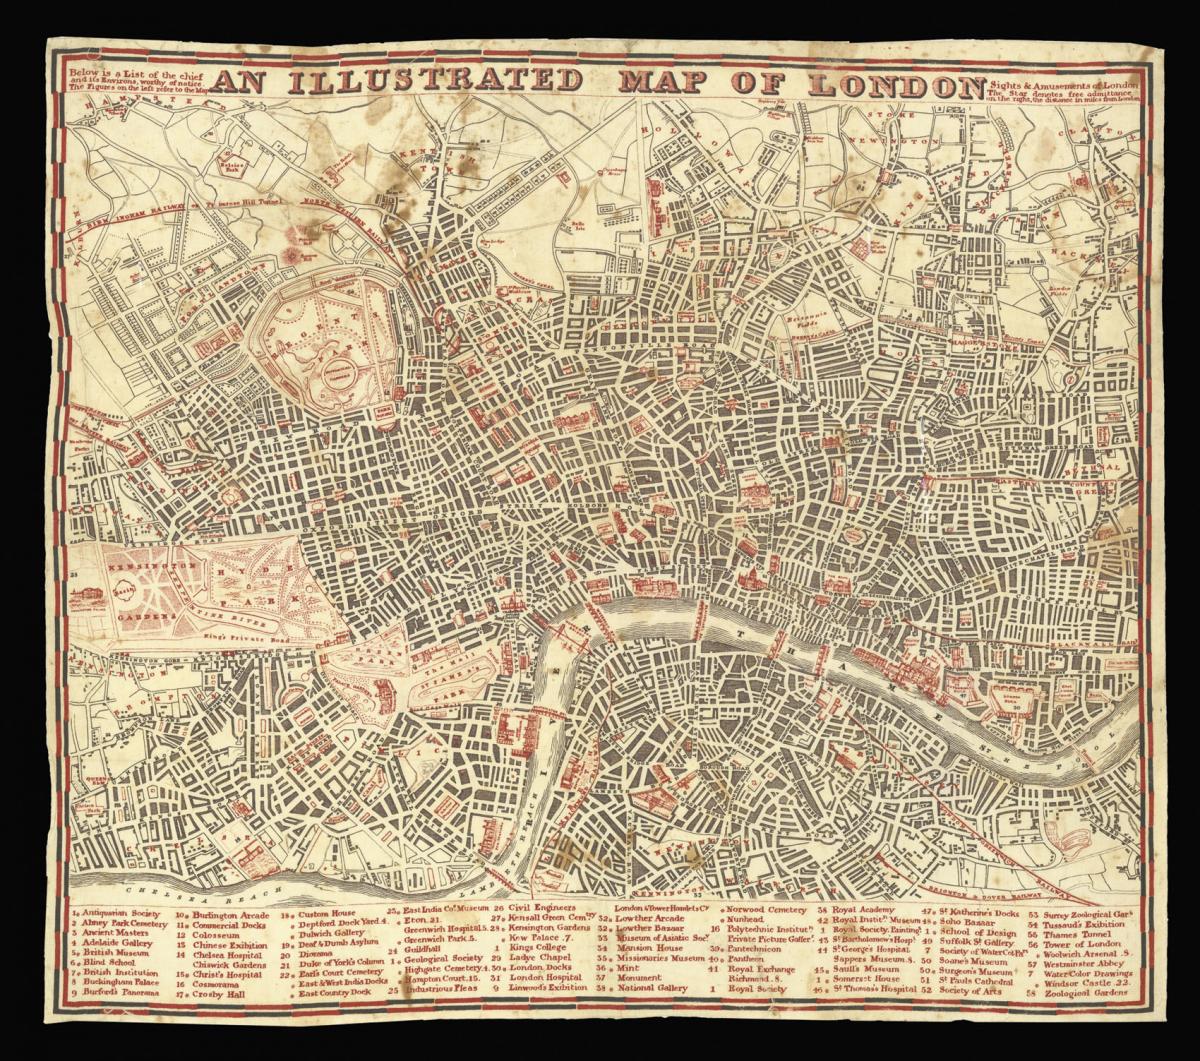 Rare map of London printed on cloth